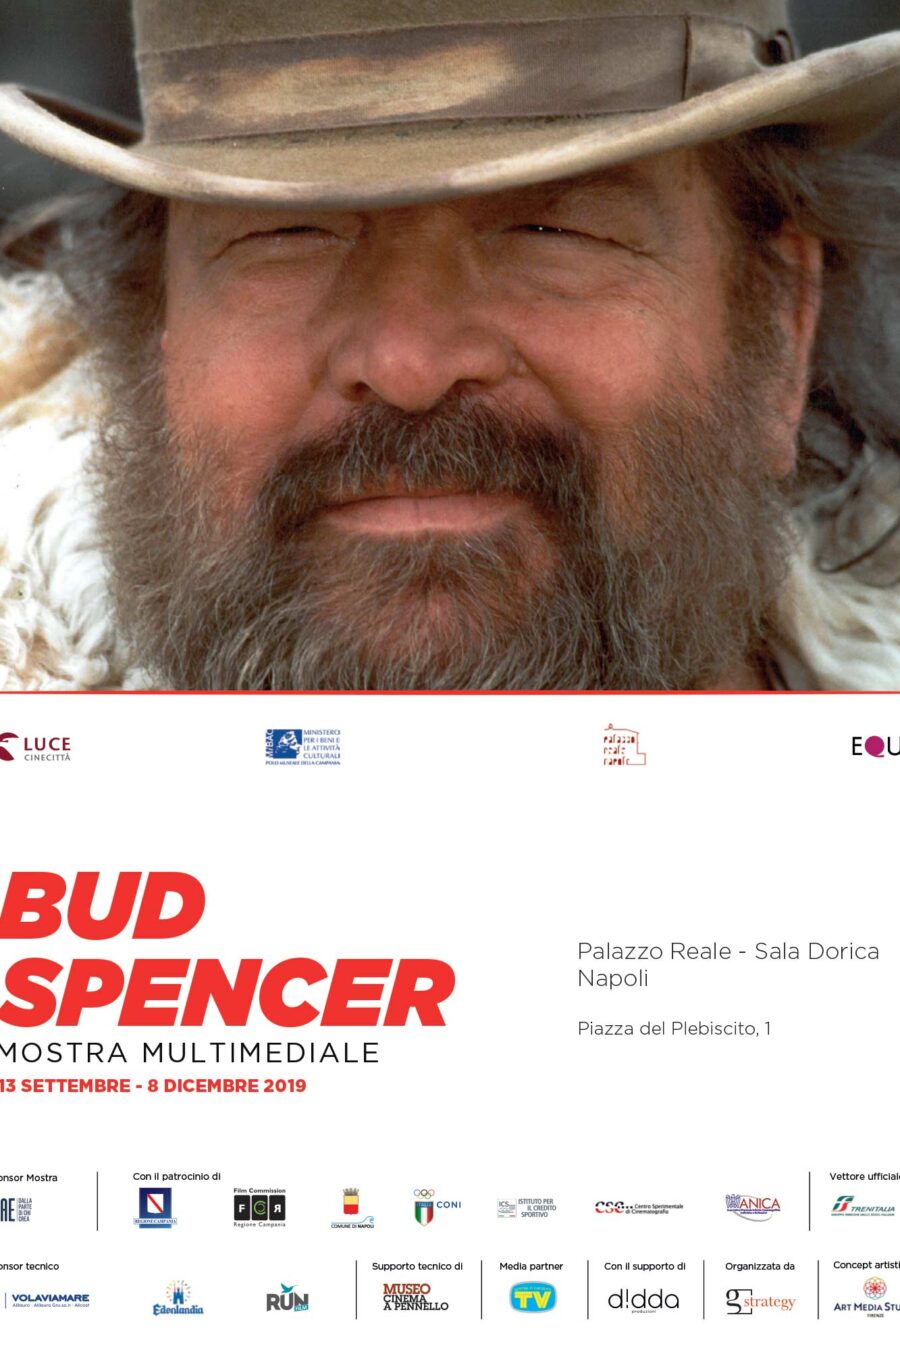 bud spencer mostra multimediale fumetto